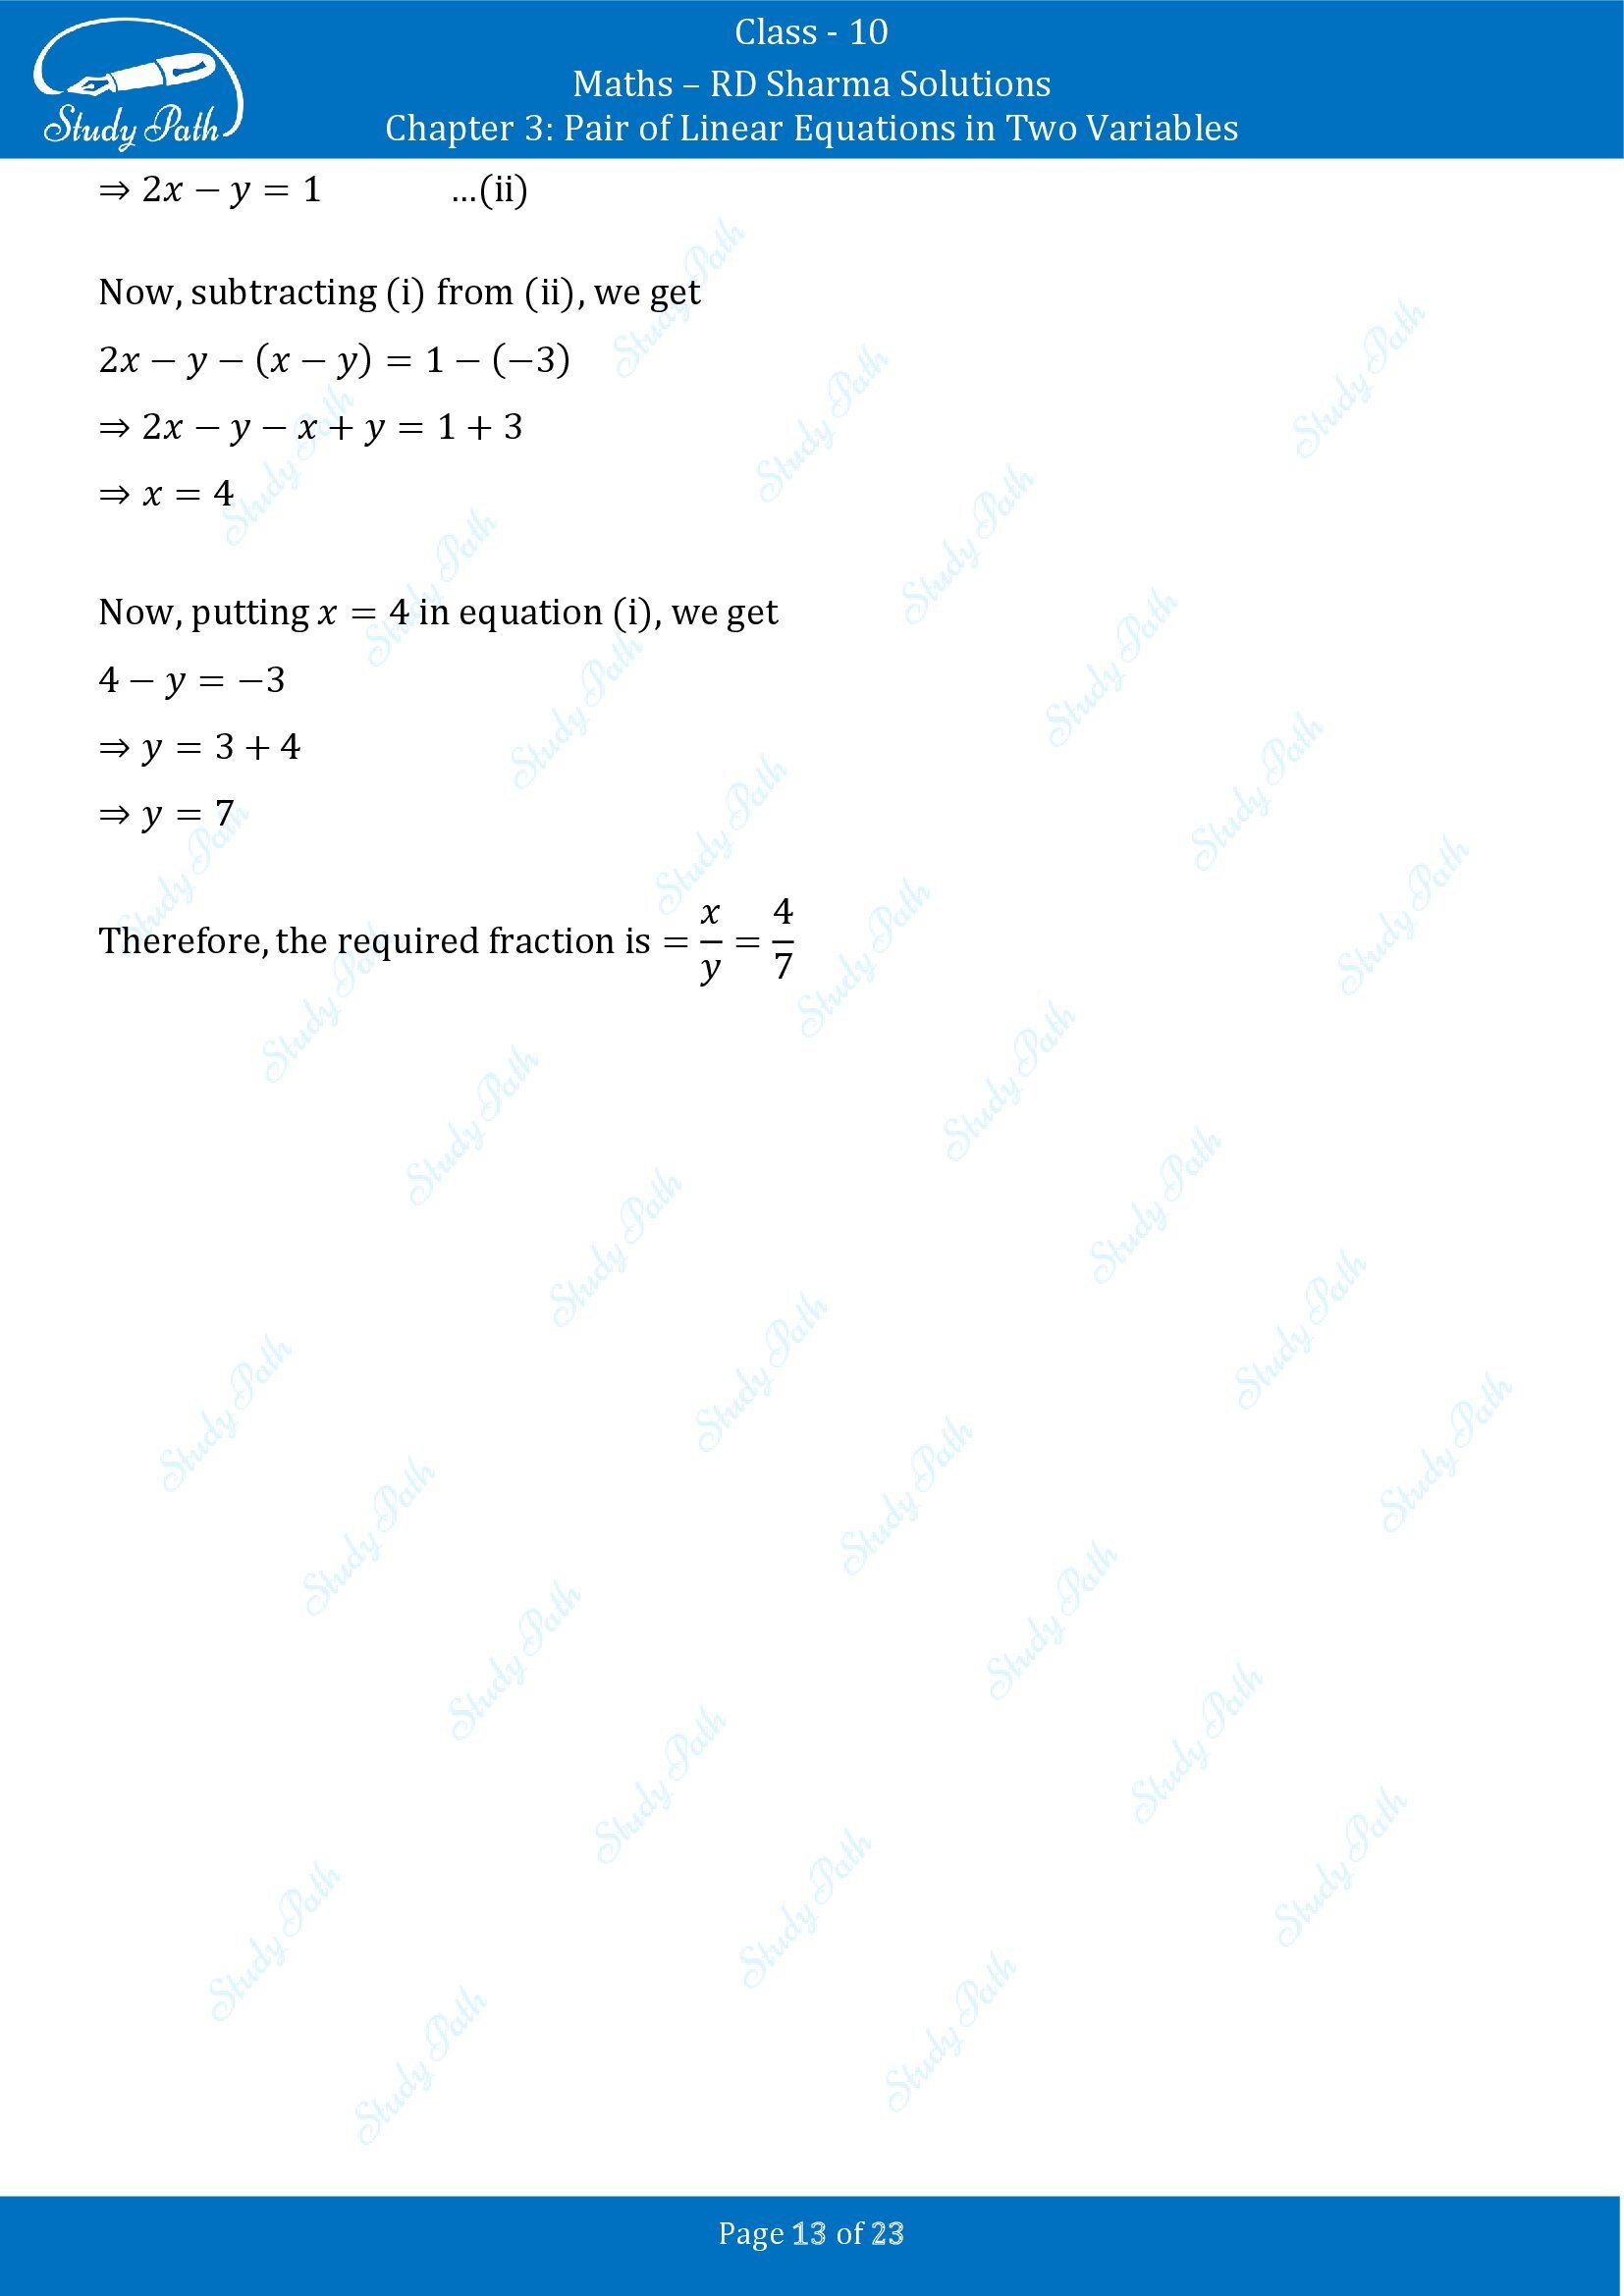 RD Sharma Solutions Class 10 Chapter 3 Pair of Linear Equations in Two Variables Exercise 3.8 00013